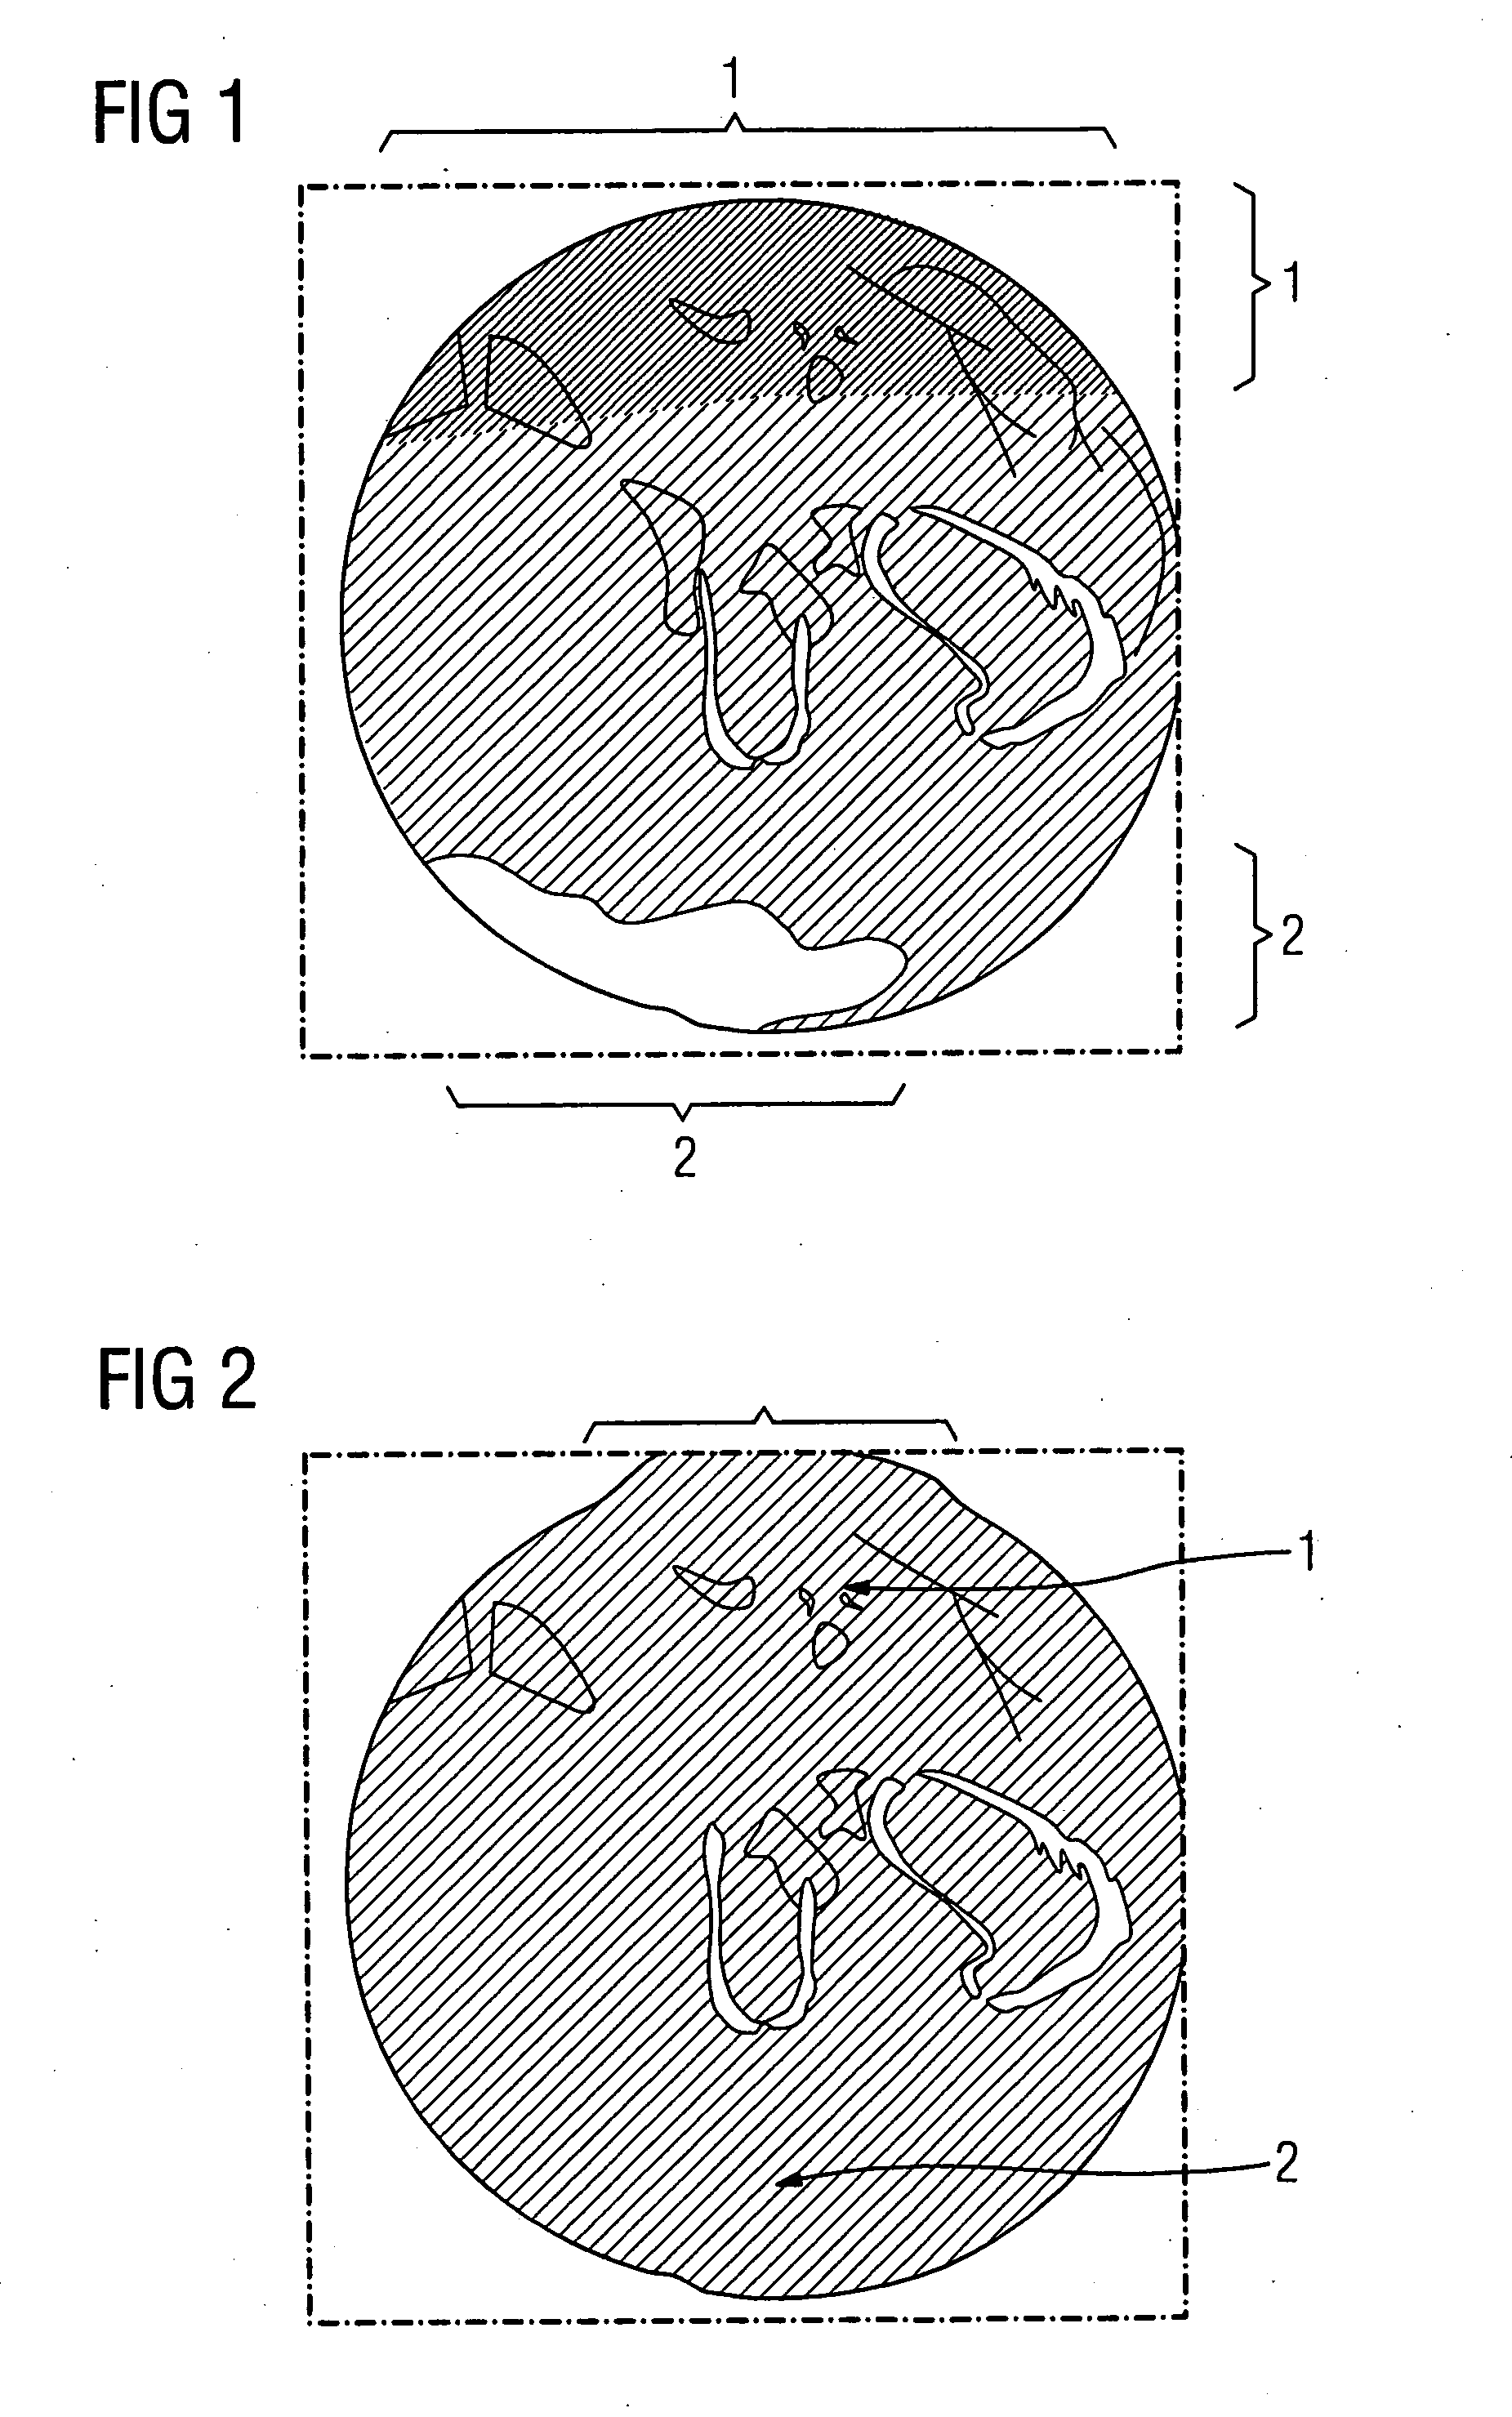 Method for reducing cupping artifacts in cone beam CT image data sets